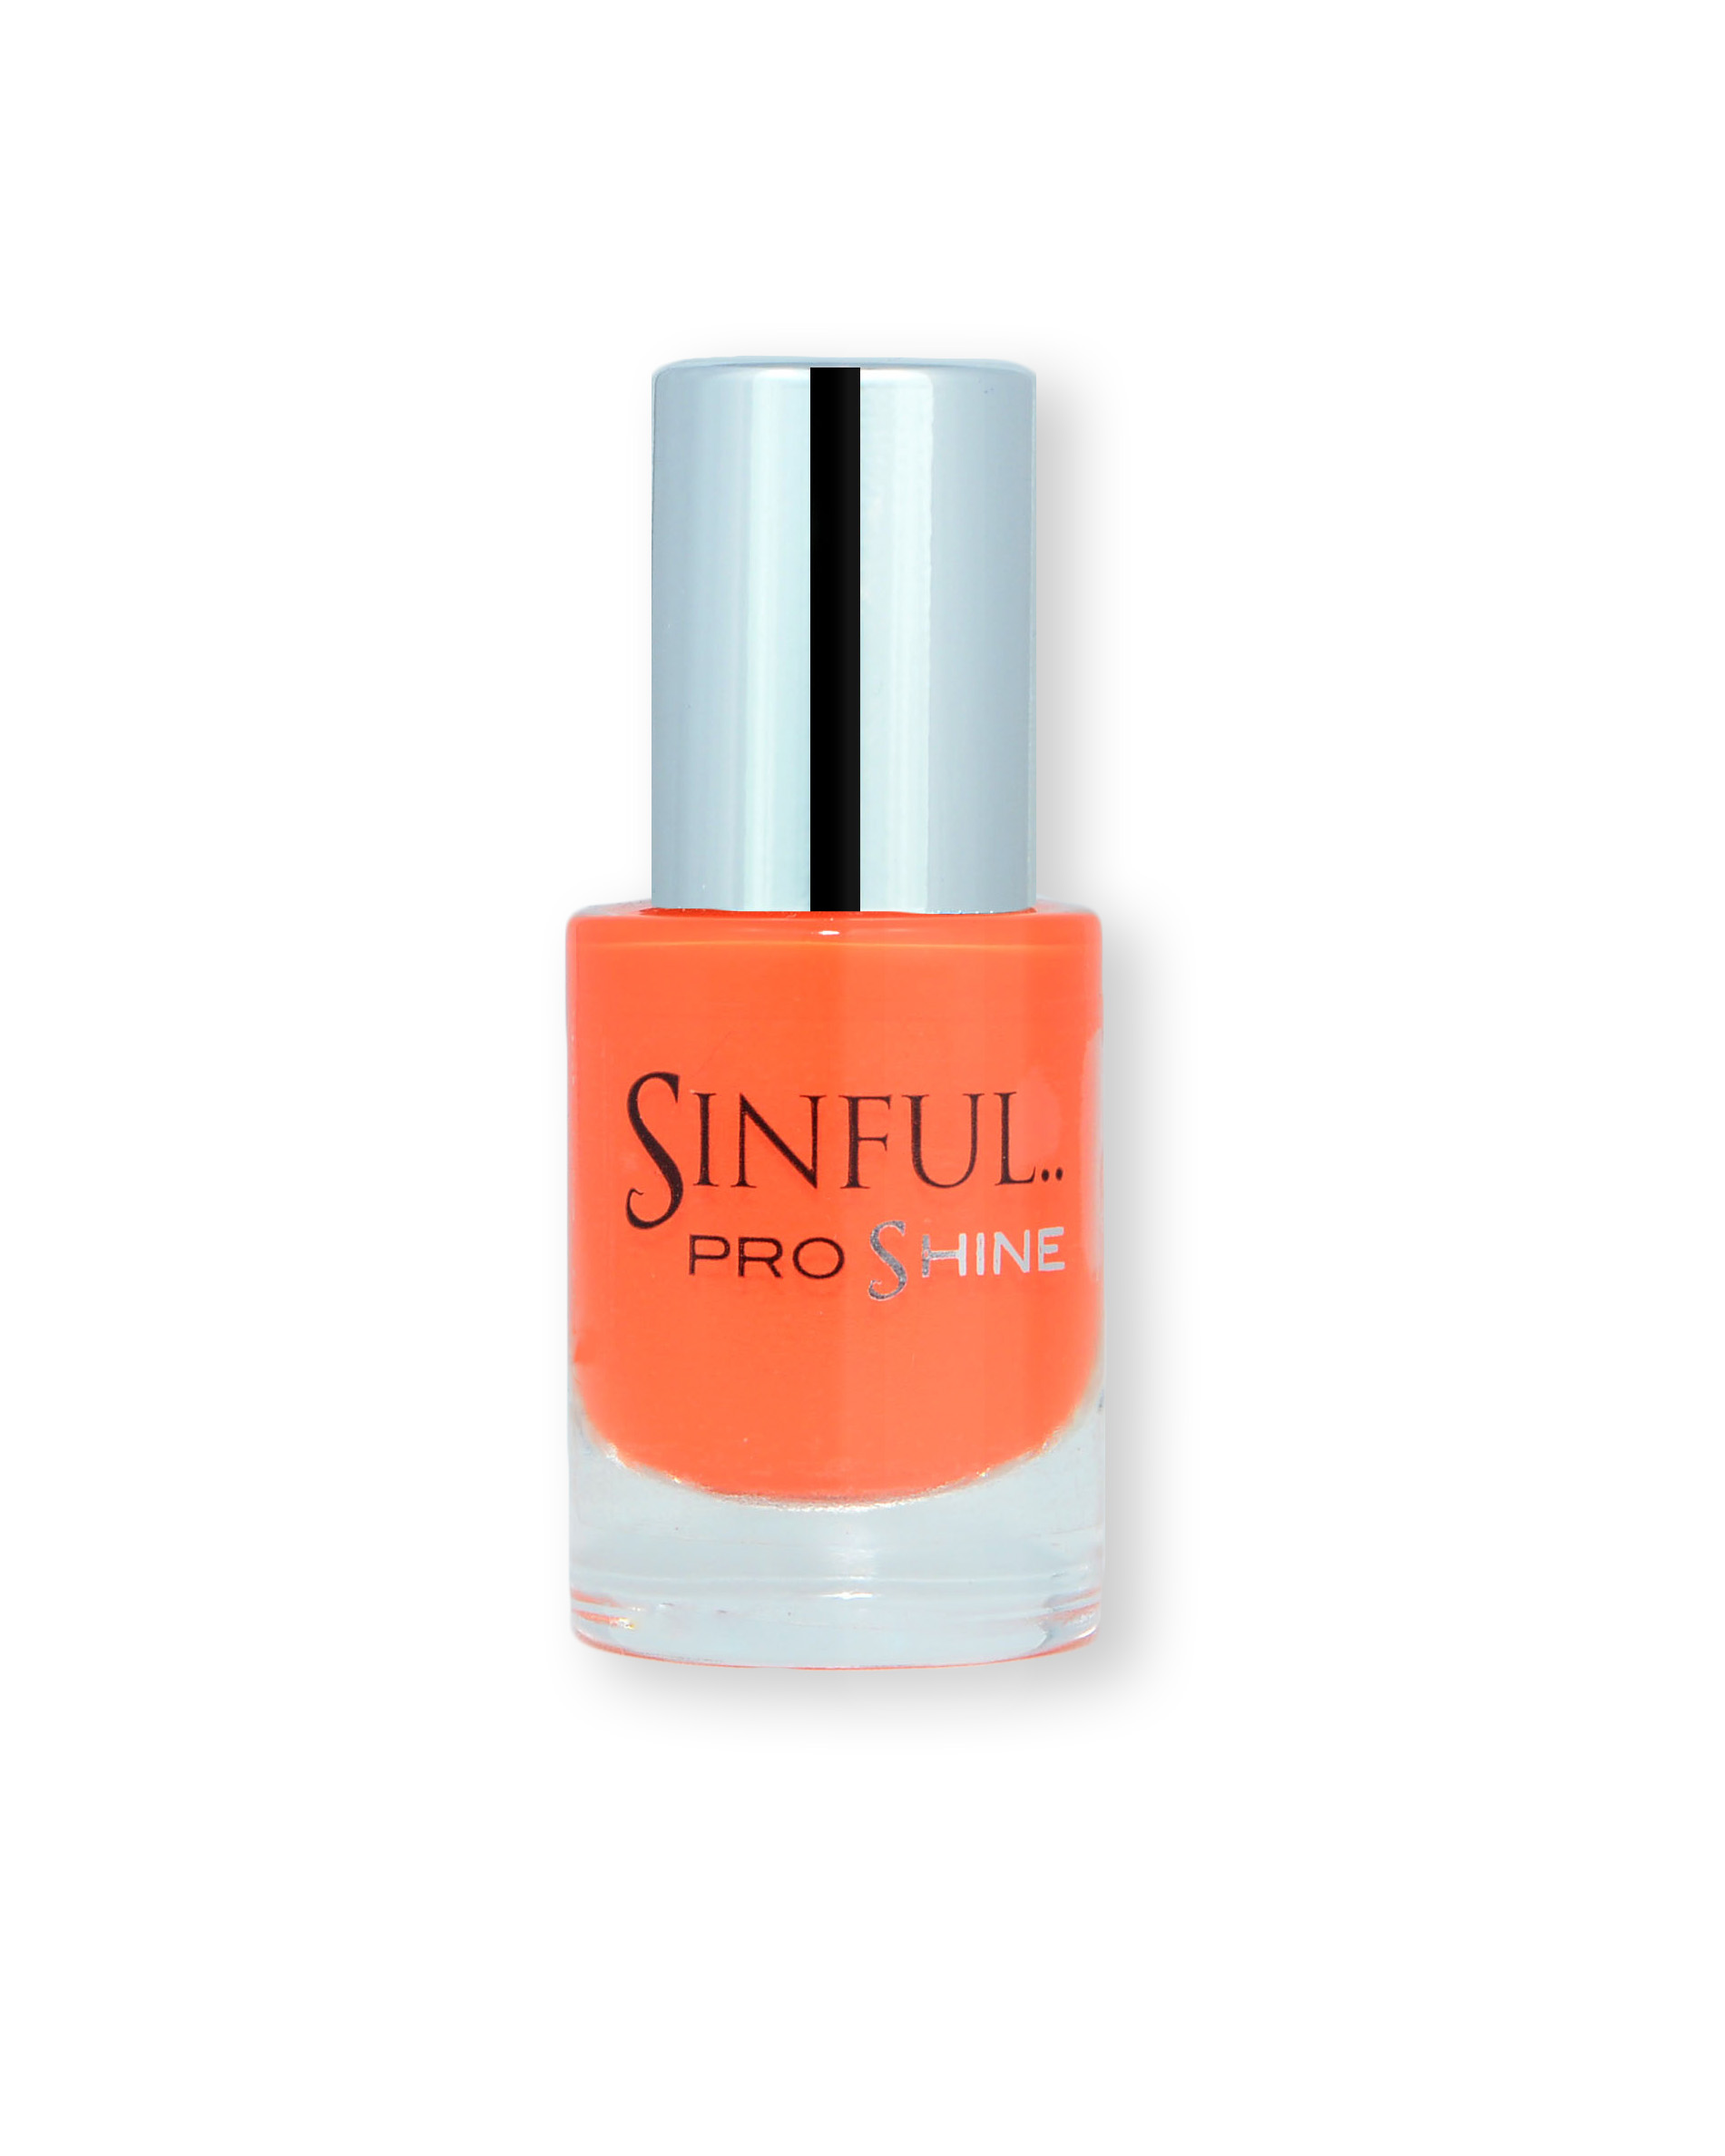 Sinful PROshine is a revolution into top spec imitation gel-like formula, easy application, full coverage and a sleek finish. Spoil yourself with the choice of 42 shades, expertly formulated with the finest grade of pigments. Luminosity: Vibrant satsuma orange, creme finish